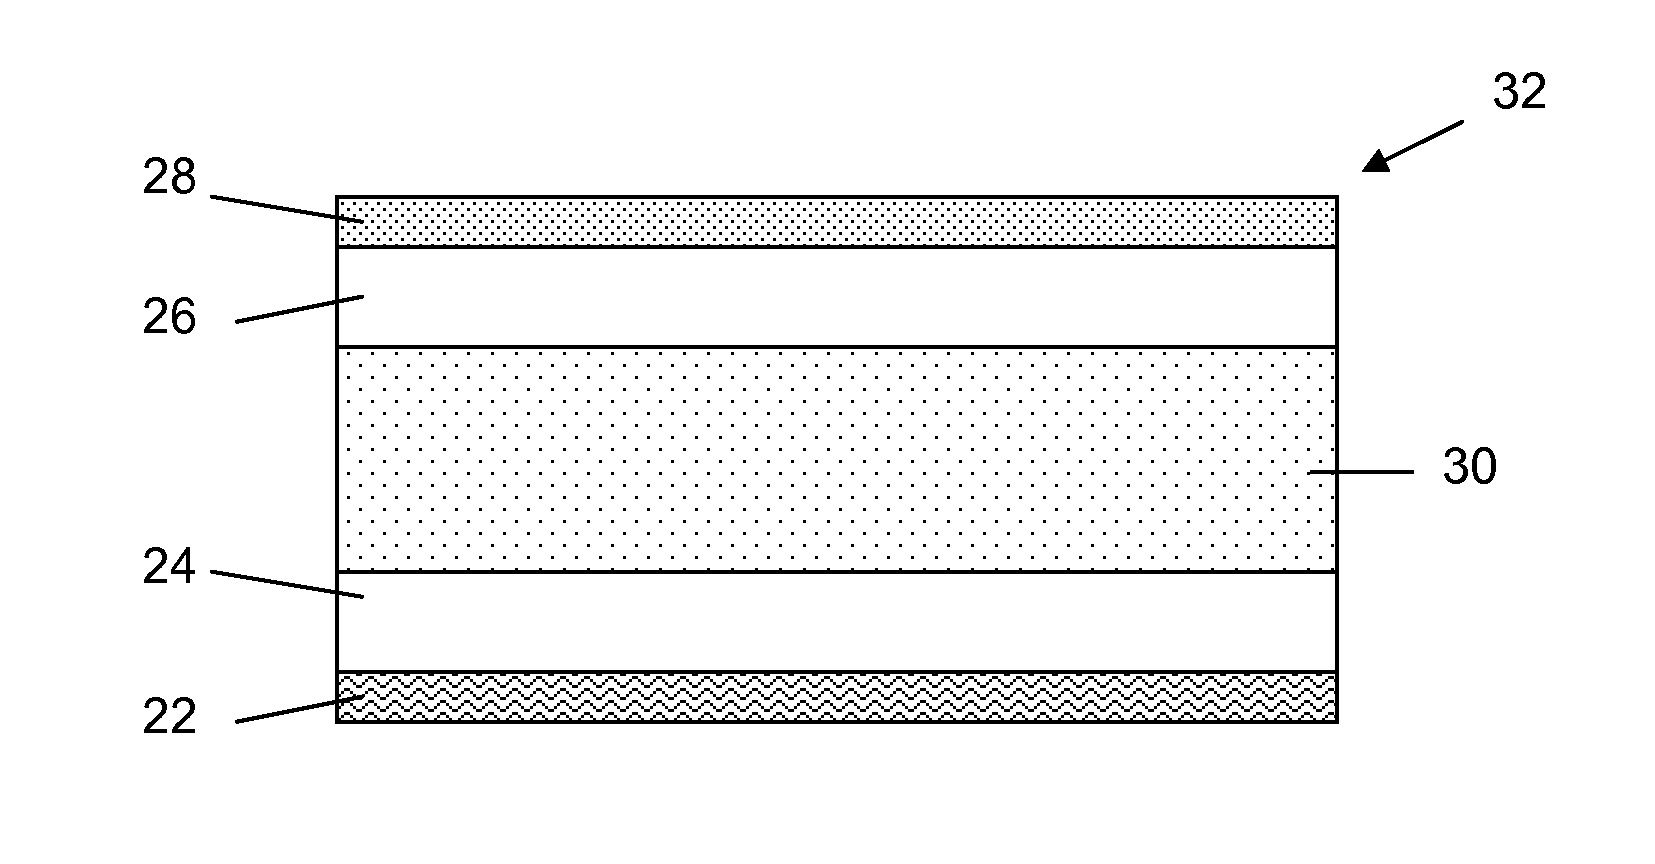 Rechargeable magnesium ion cell components and assembly